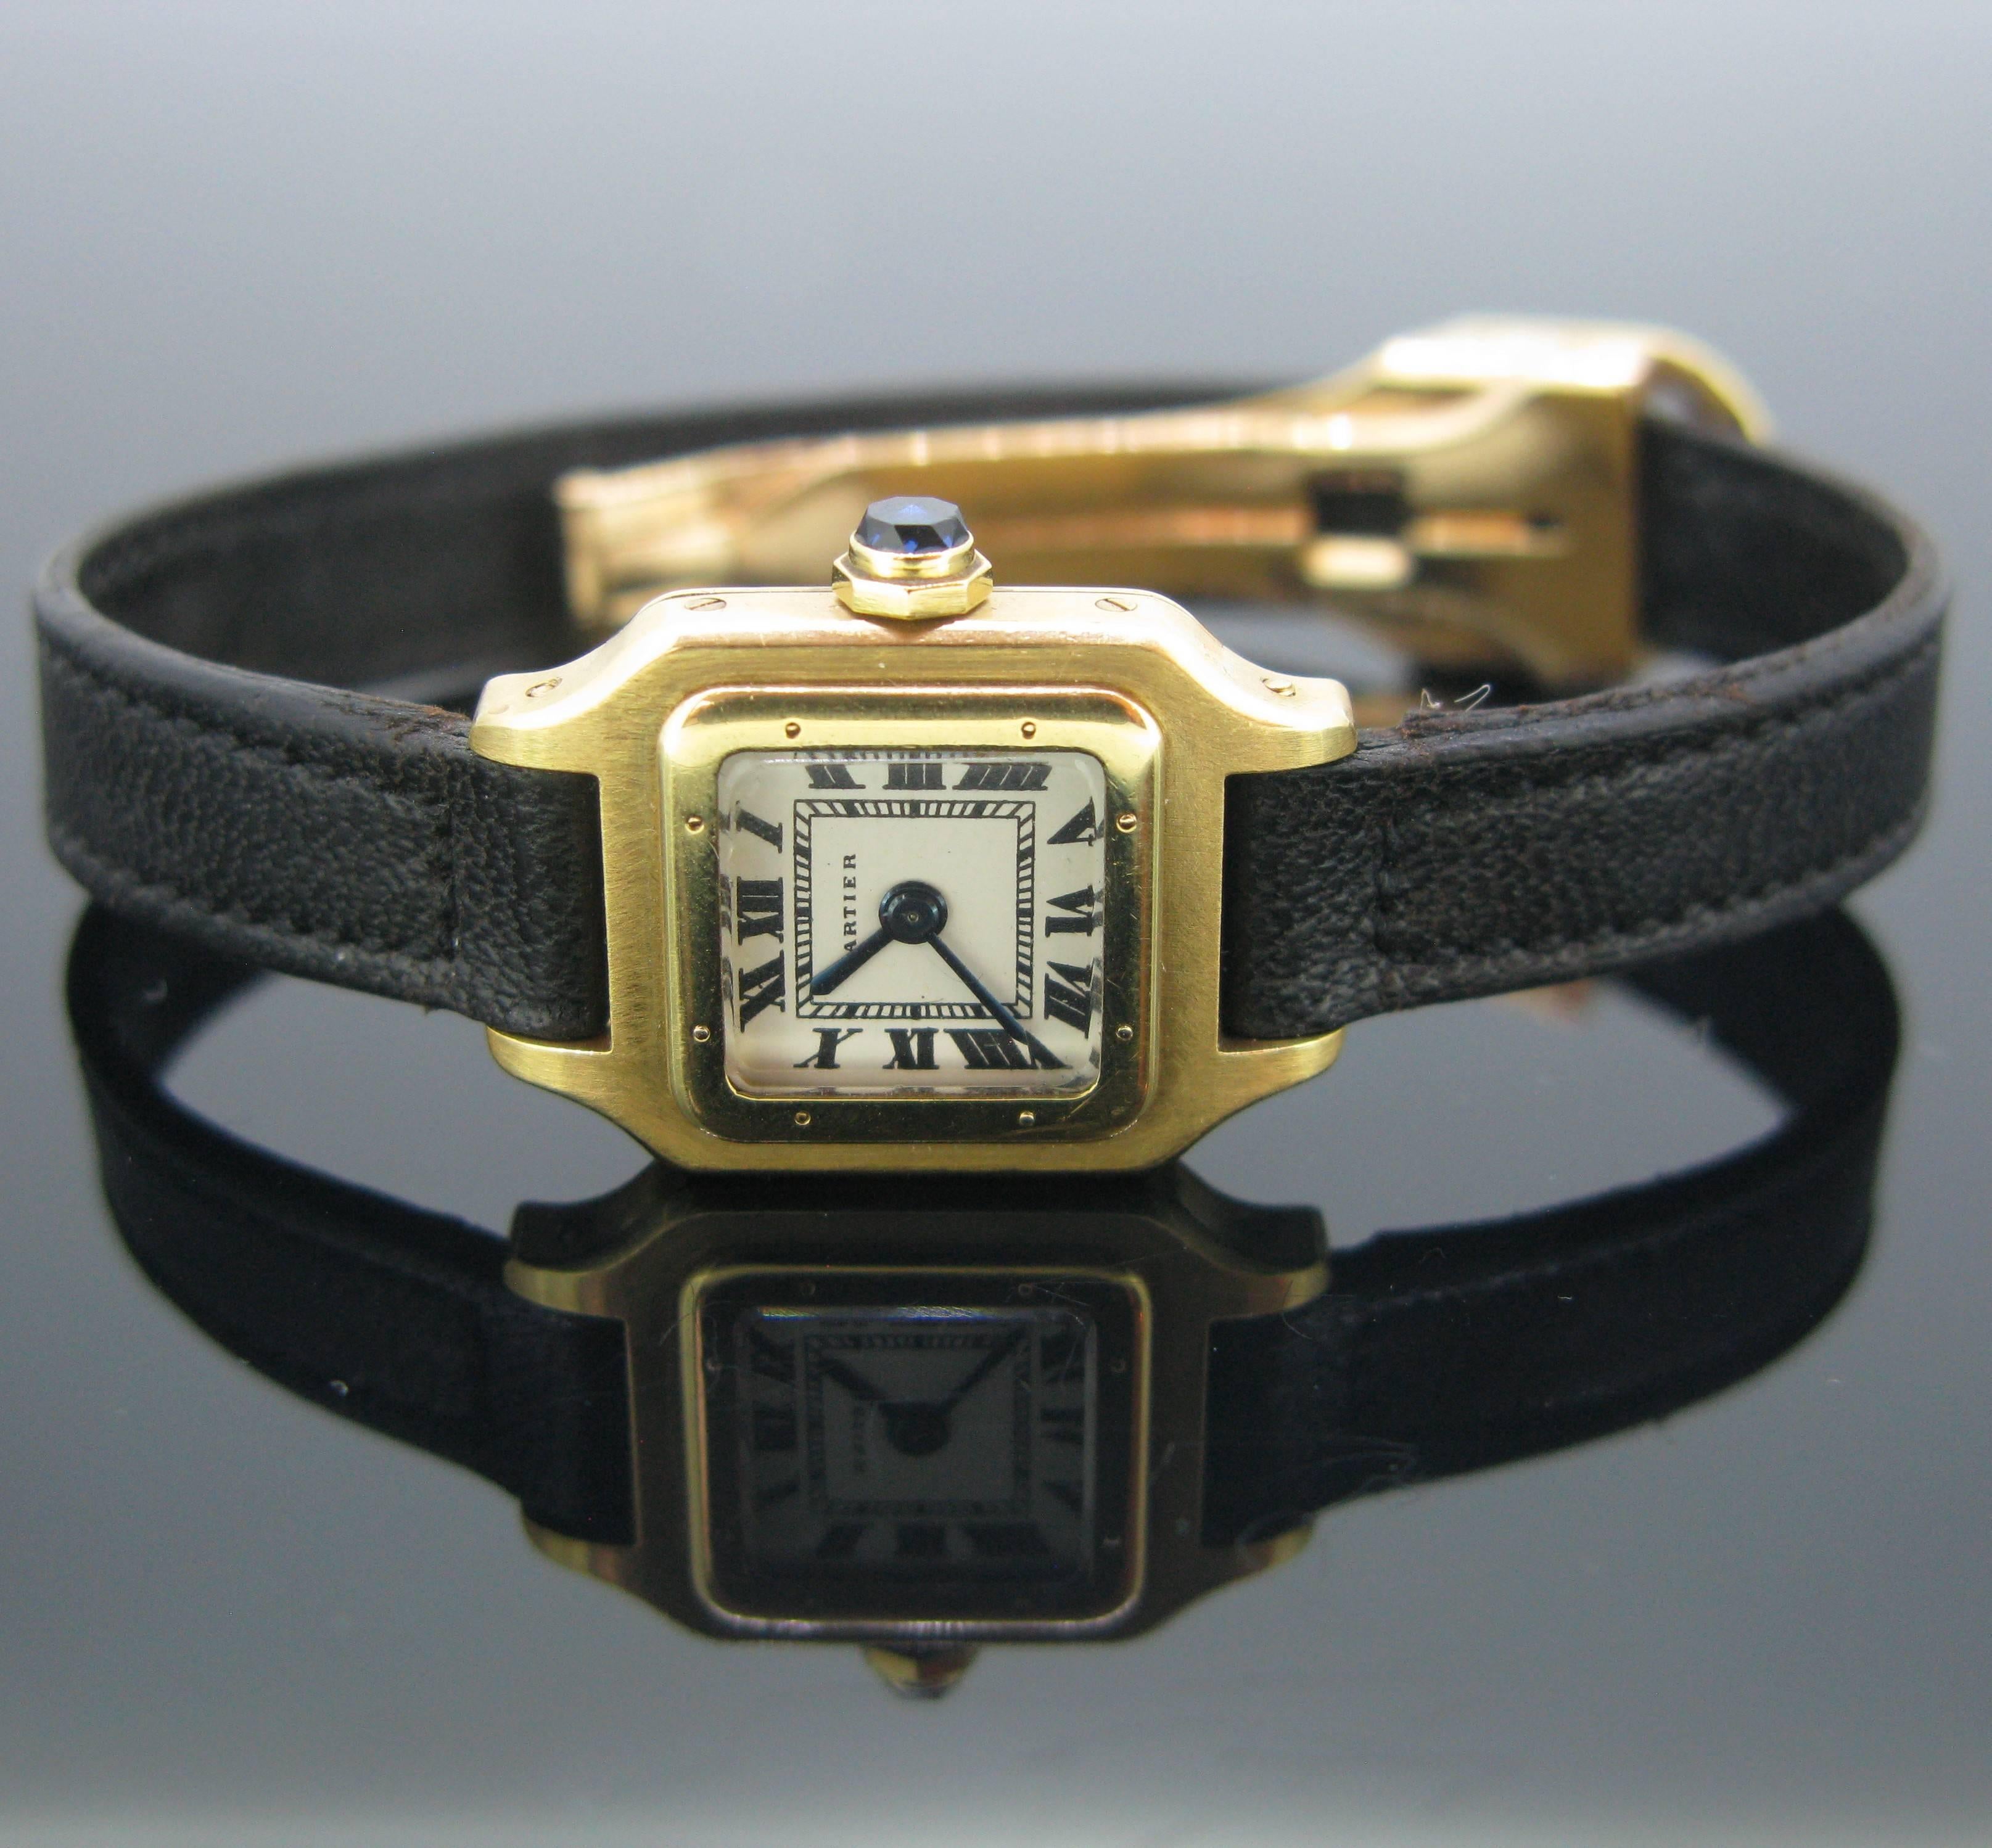 Cartier Mini Santos Manual Winding wrist watch. The dial is white with black Roman numerals. The square case is made in 18k Yellow Gold and the beaded crown is set with a synthetic faceted sapphire. The strap is in black leather and with an 18k